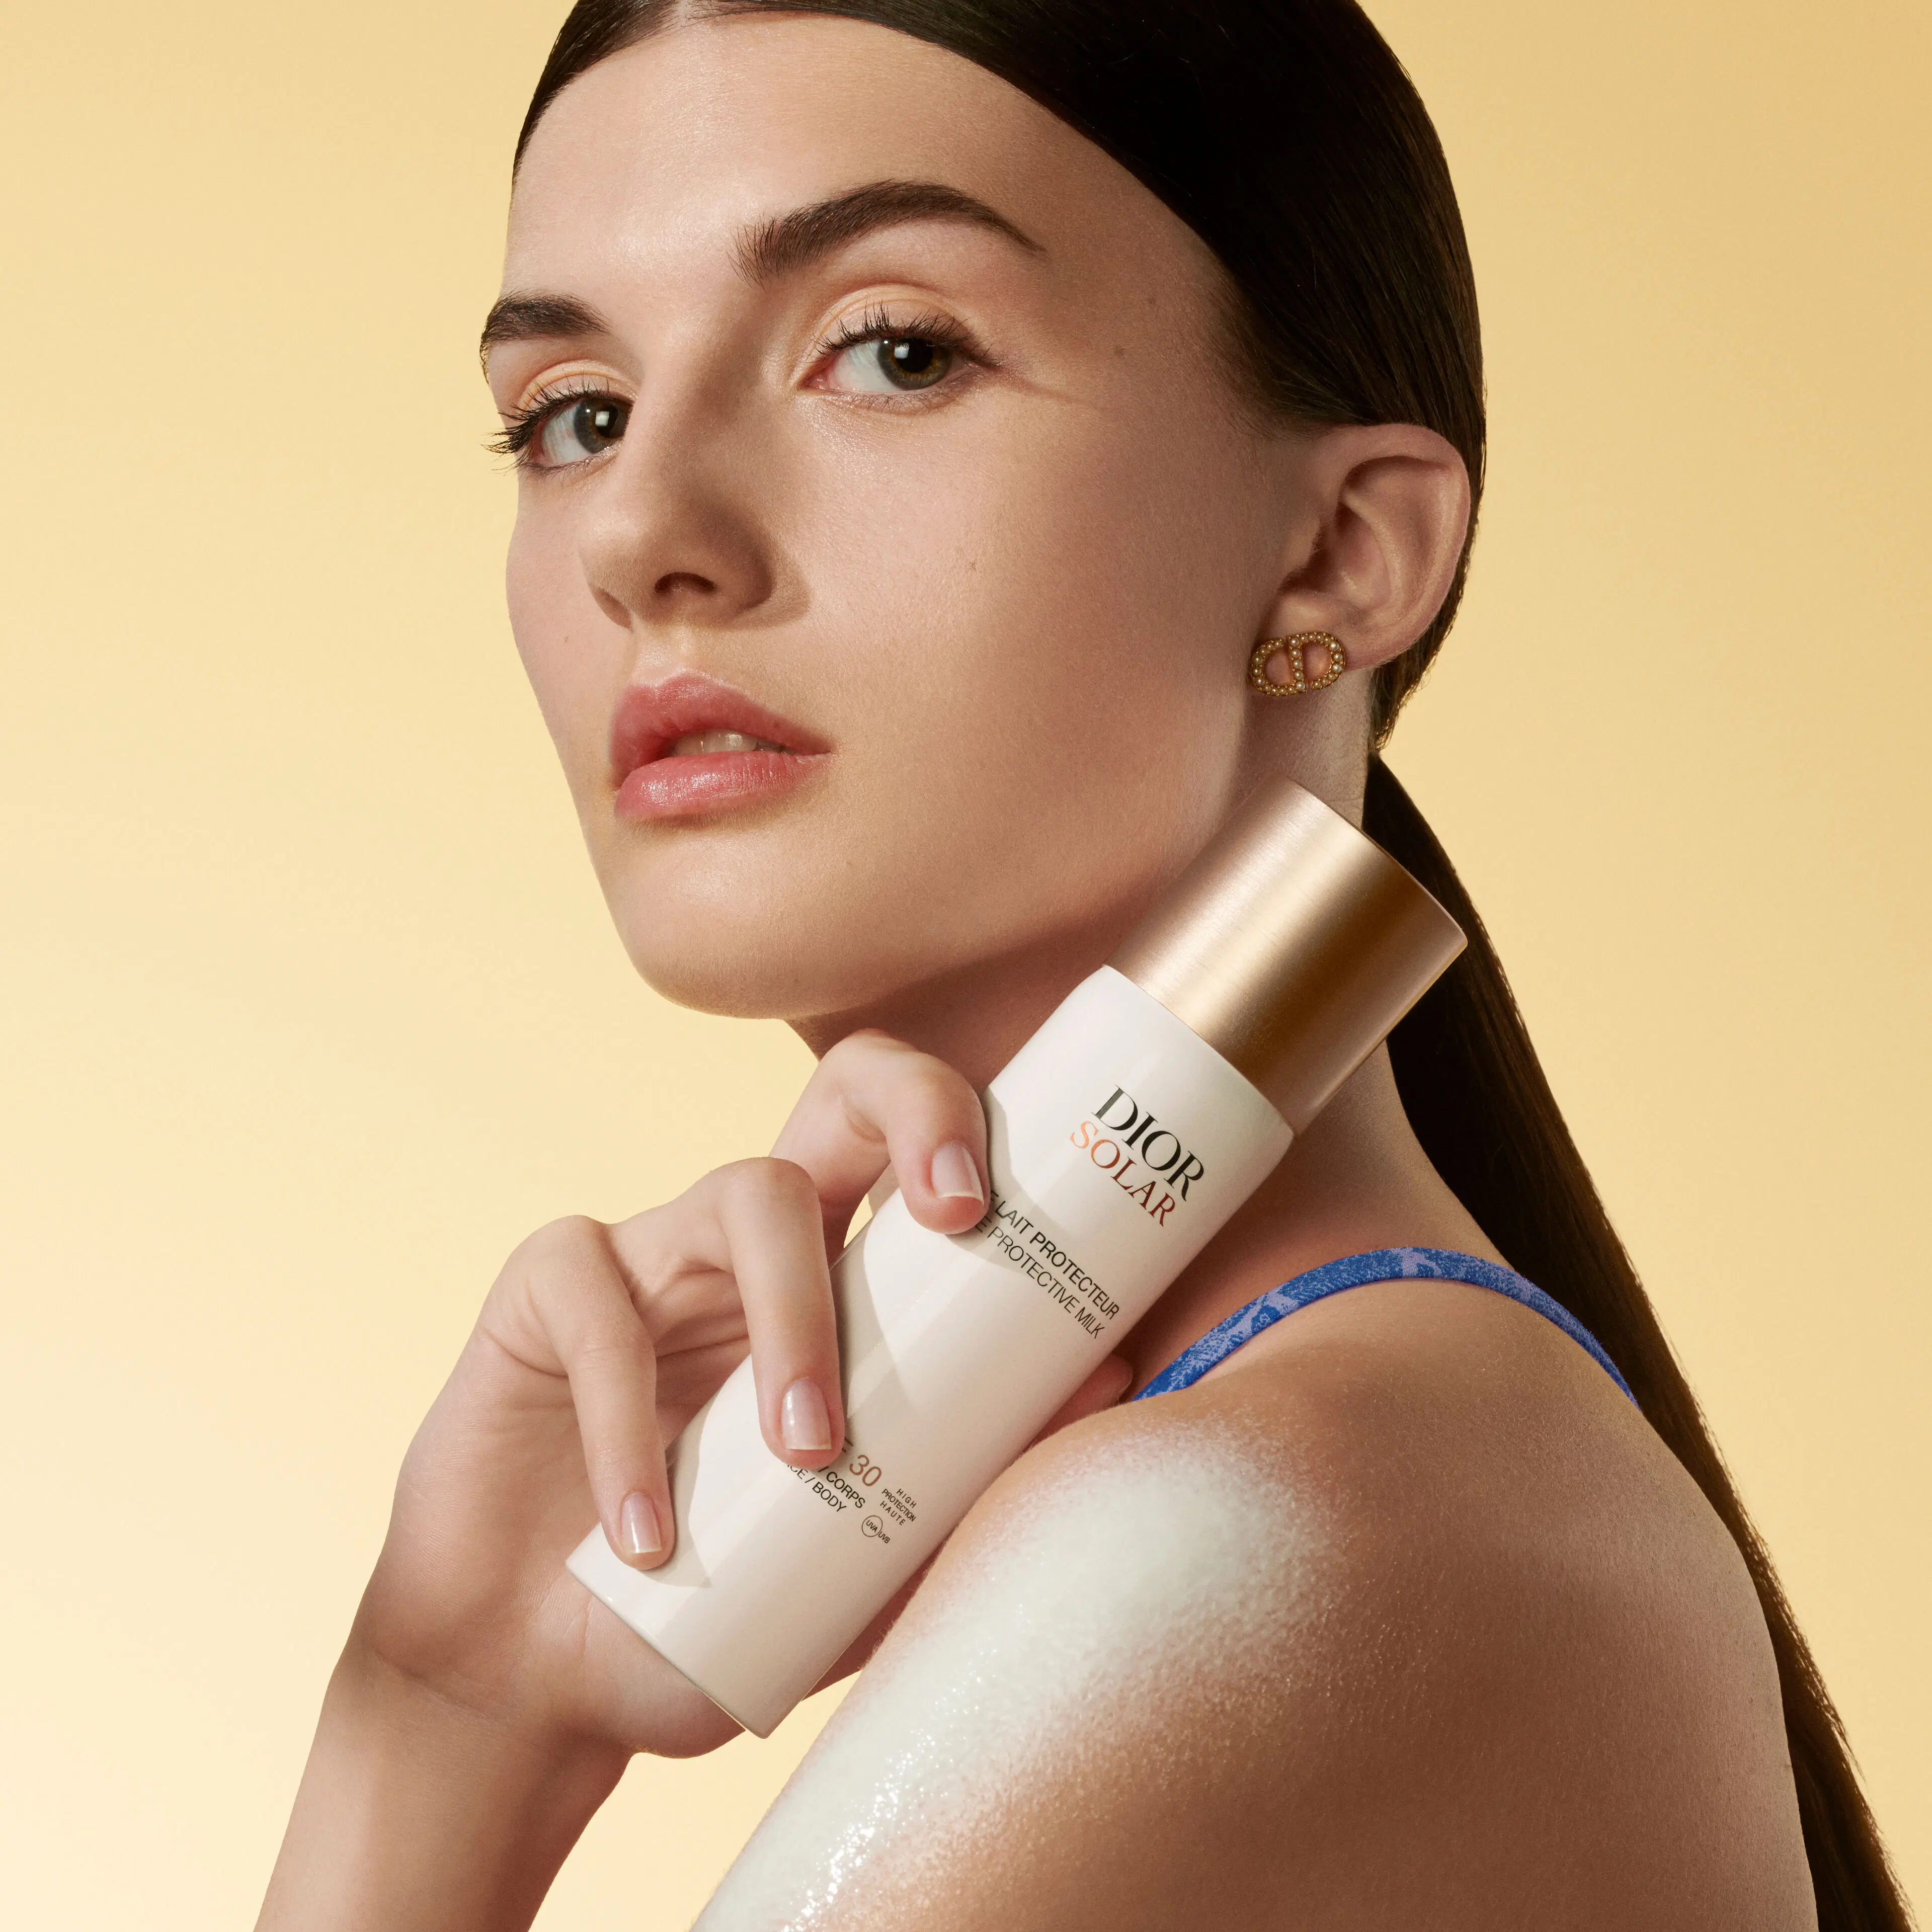 DIOR Solar The Protective Milk for Face and Body SPF 30 aurinkovoide 125 ml